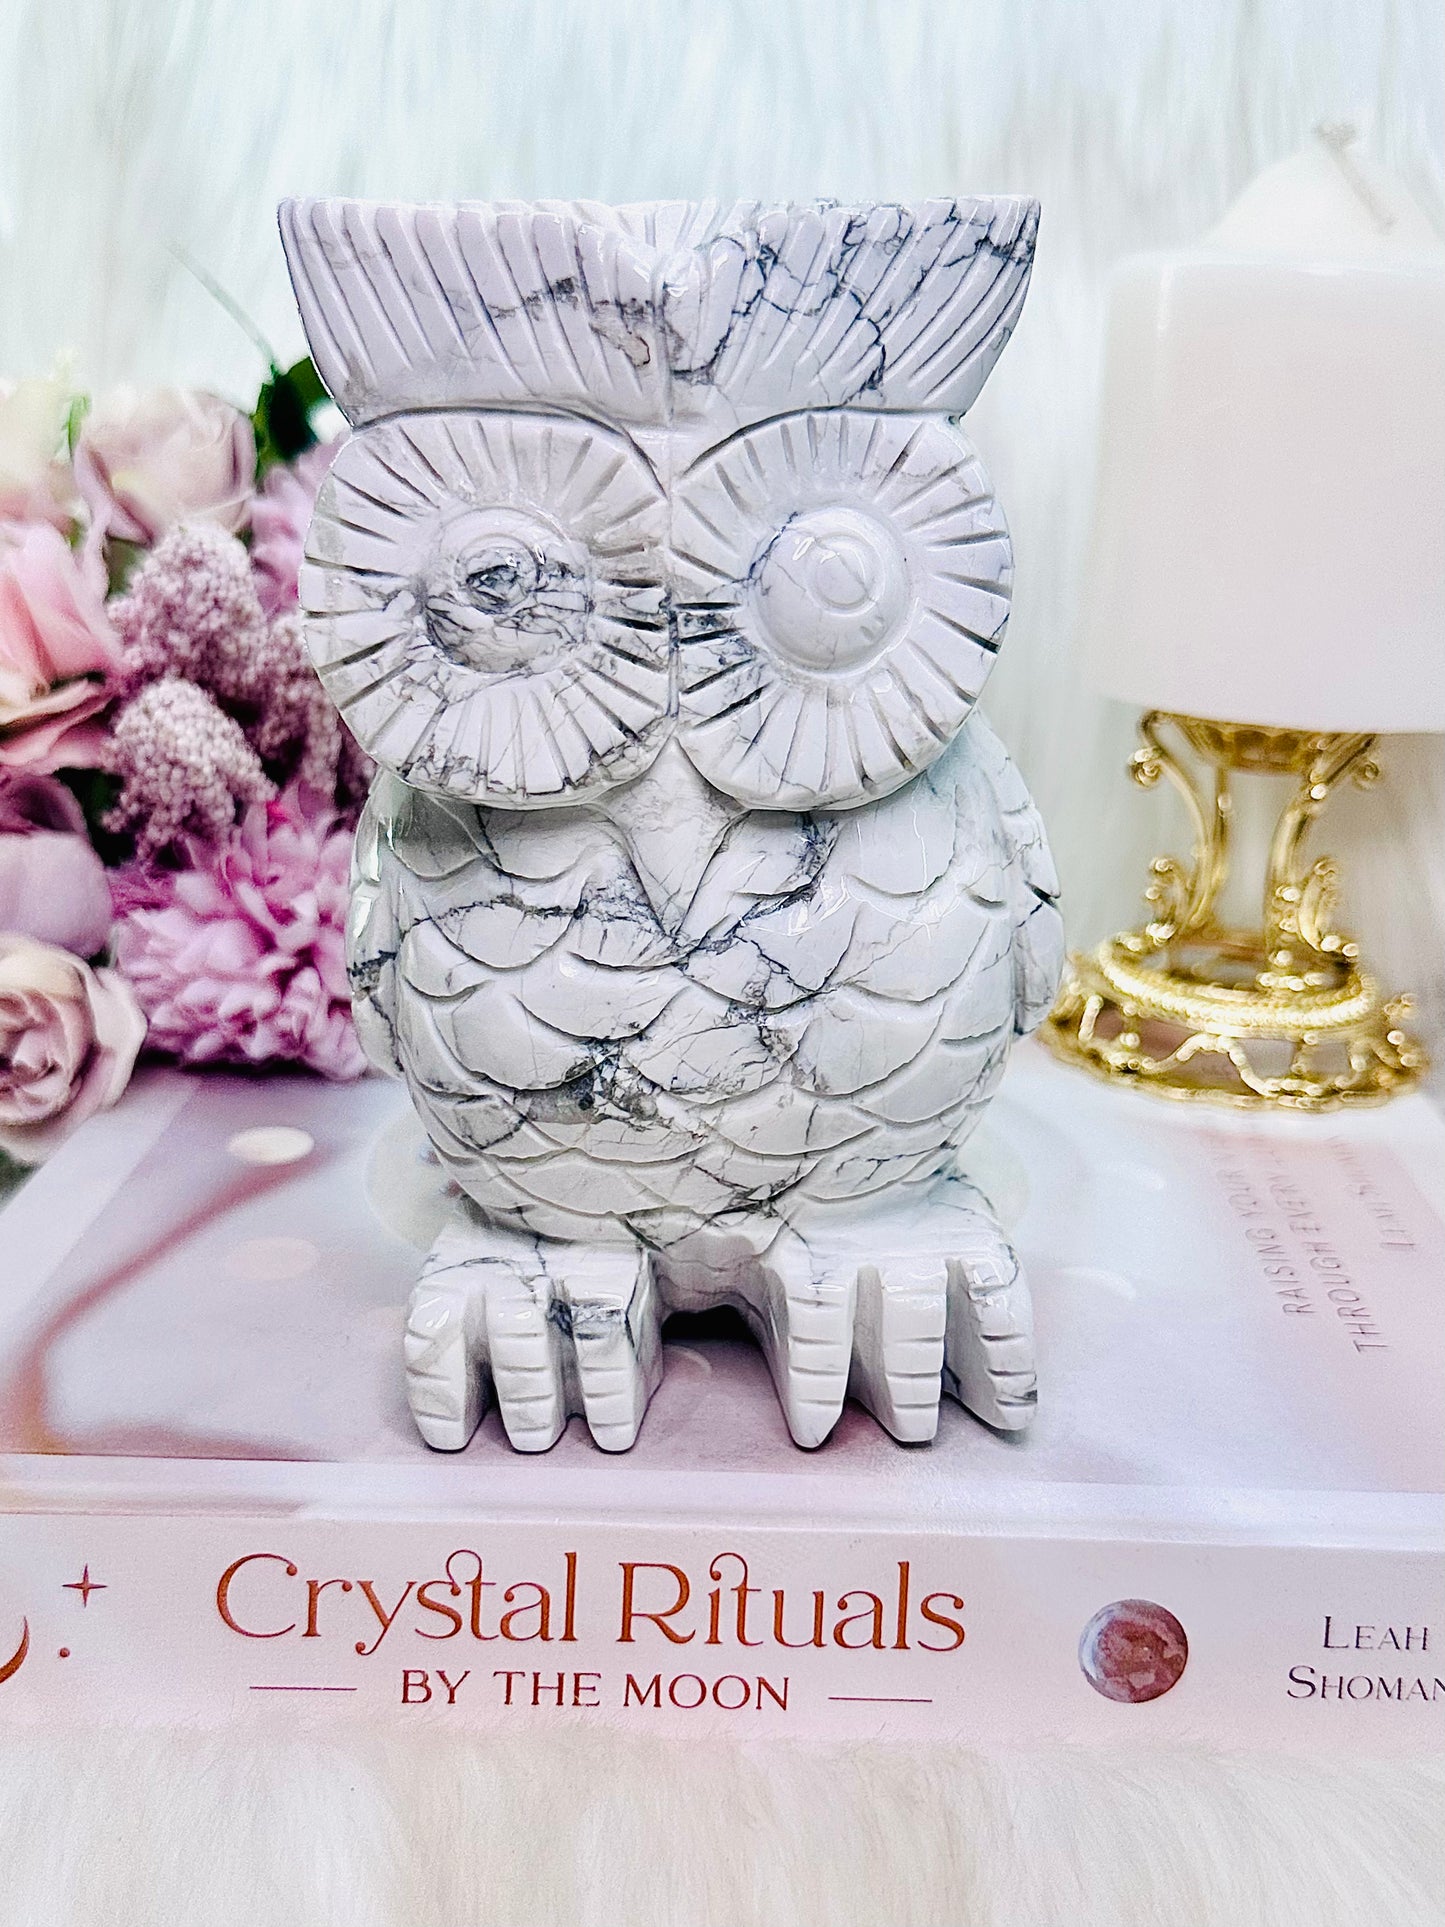 ⚜️ SALE ⚜️ Supports Anxiety ~ Omg!!! Wow!!! Absolutely Huge 1.6KG Stunning Perfectly Hand Carved Howlite Owl With Incredible Healing Energy